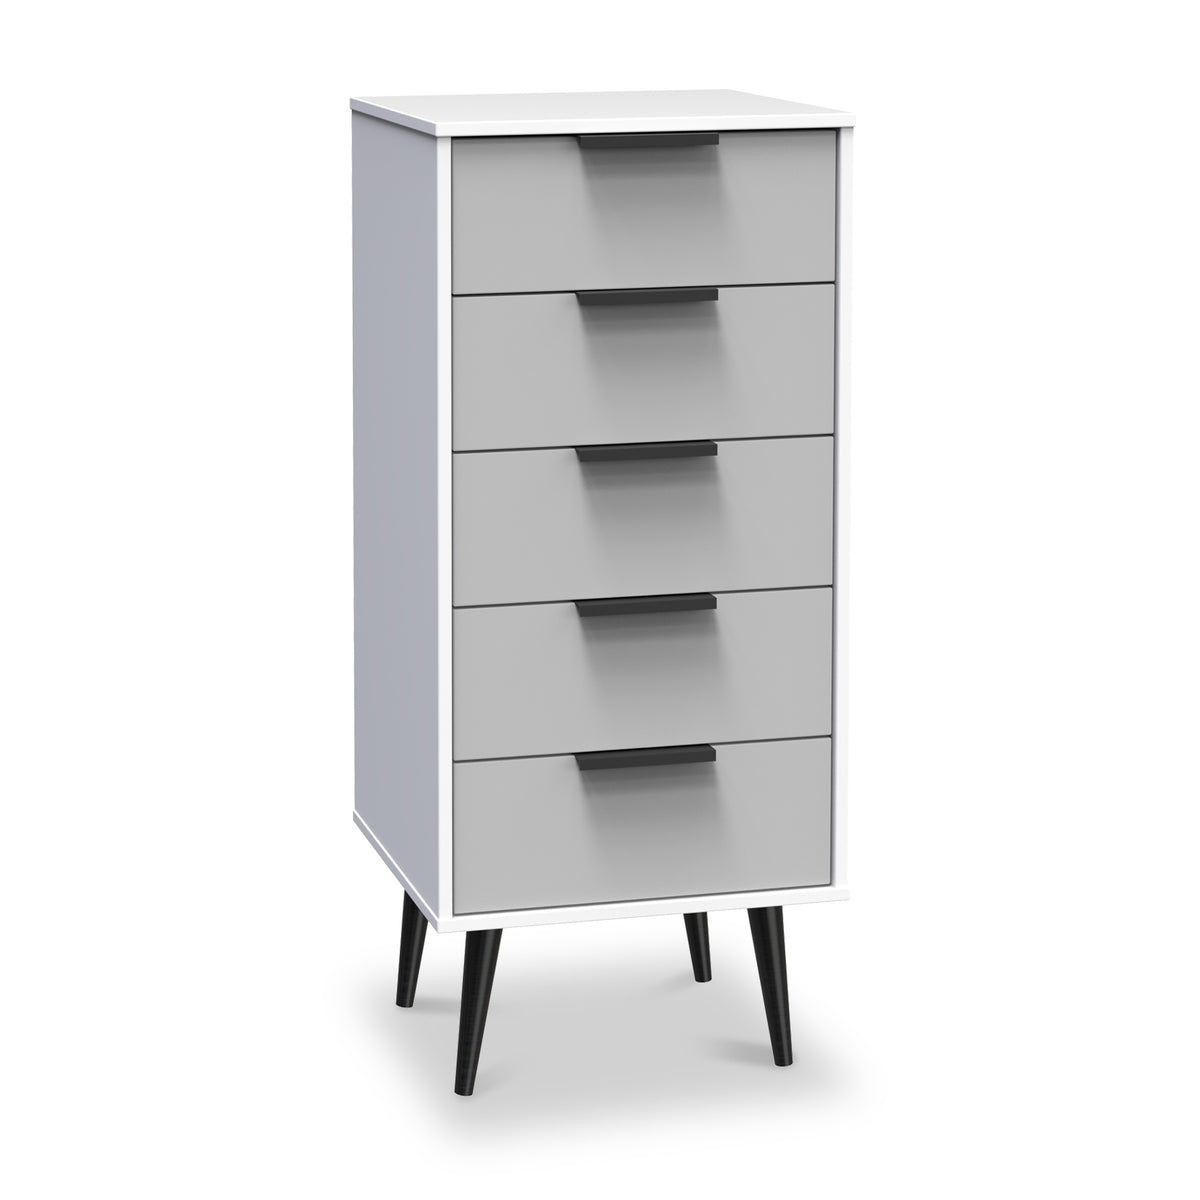 Asher White and Grey Tallboy Chest of Drawers from Roseland Furniture